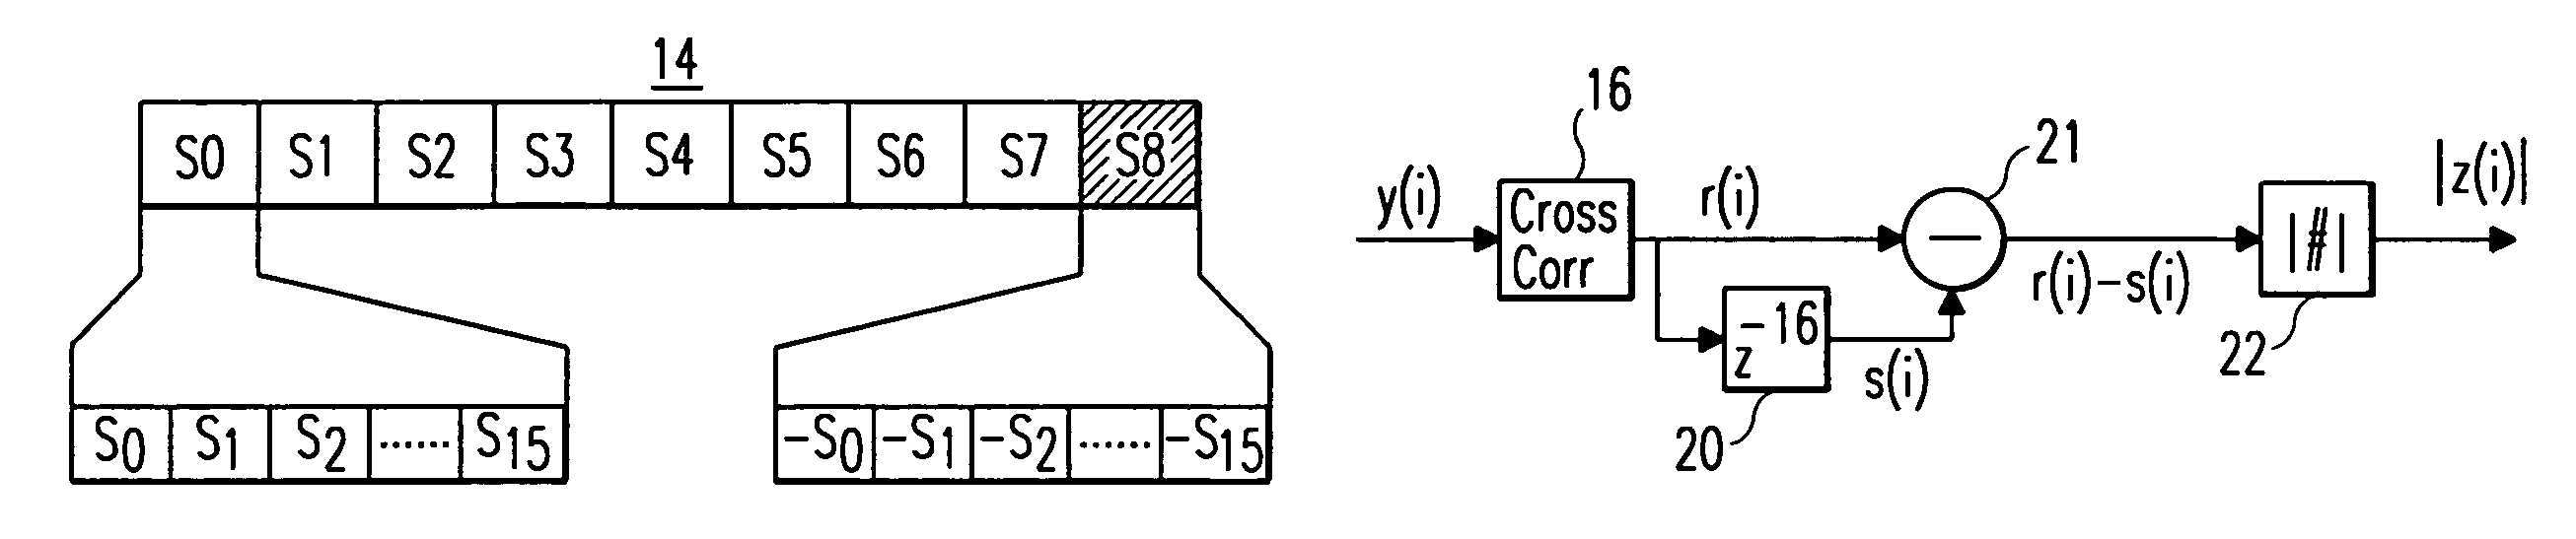 Receiving apparatus and synchronizing method for a digital telecommunication system